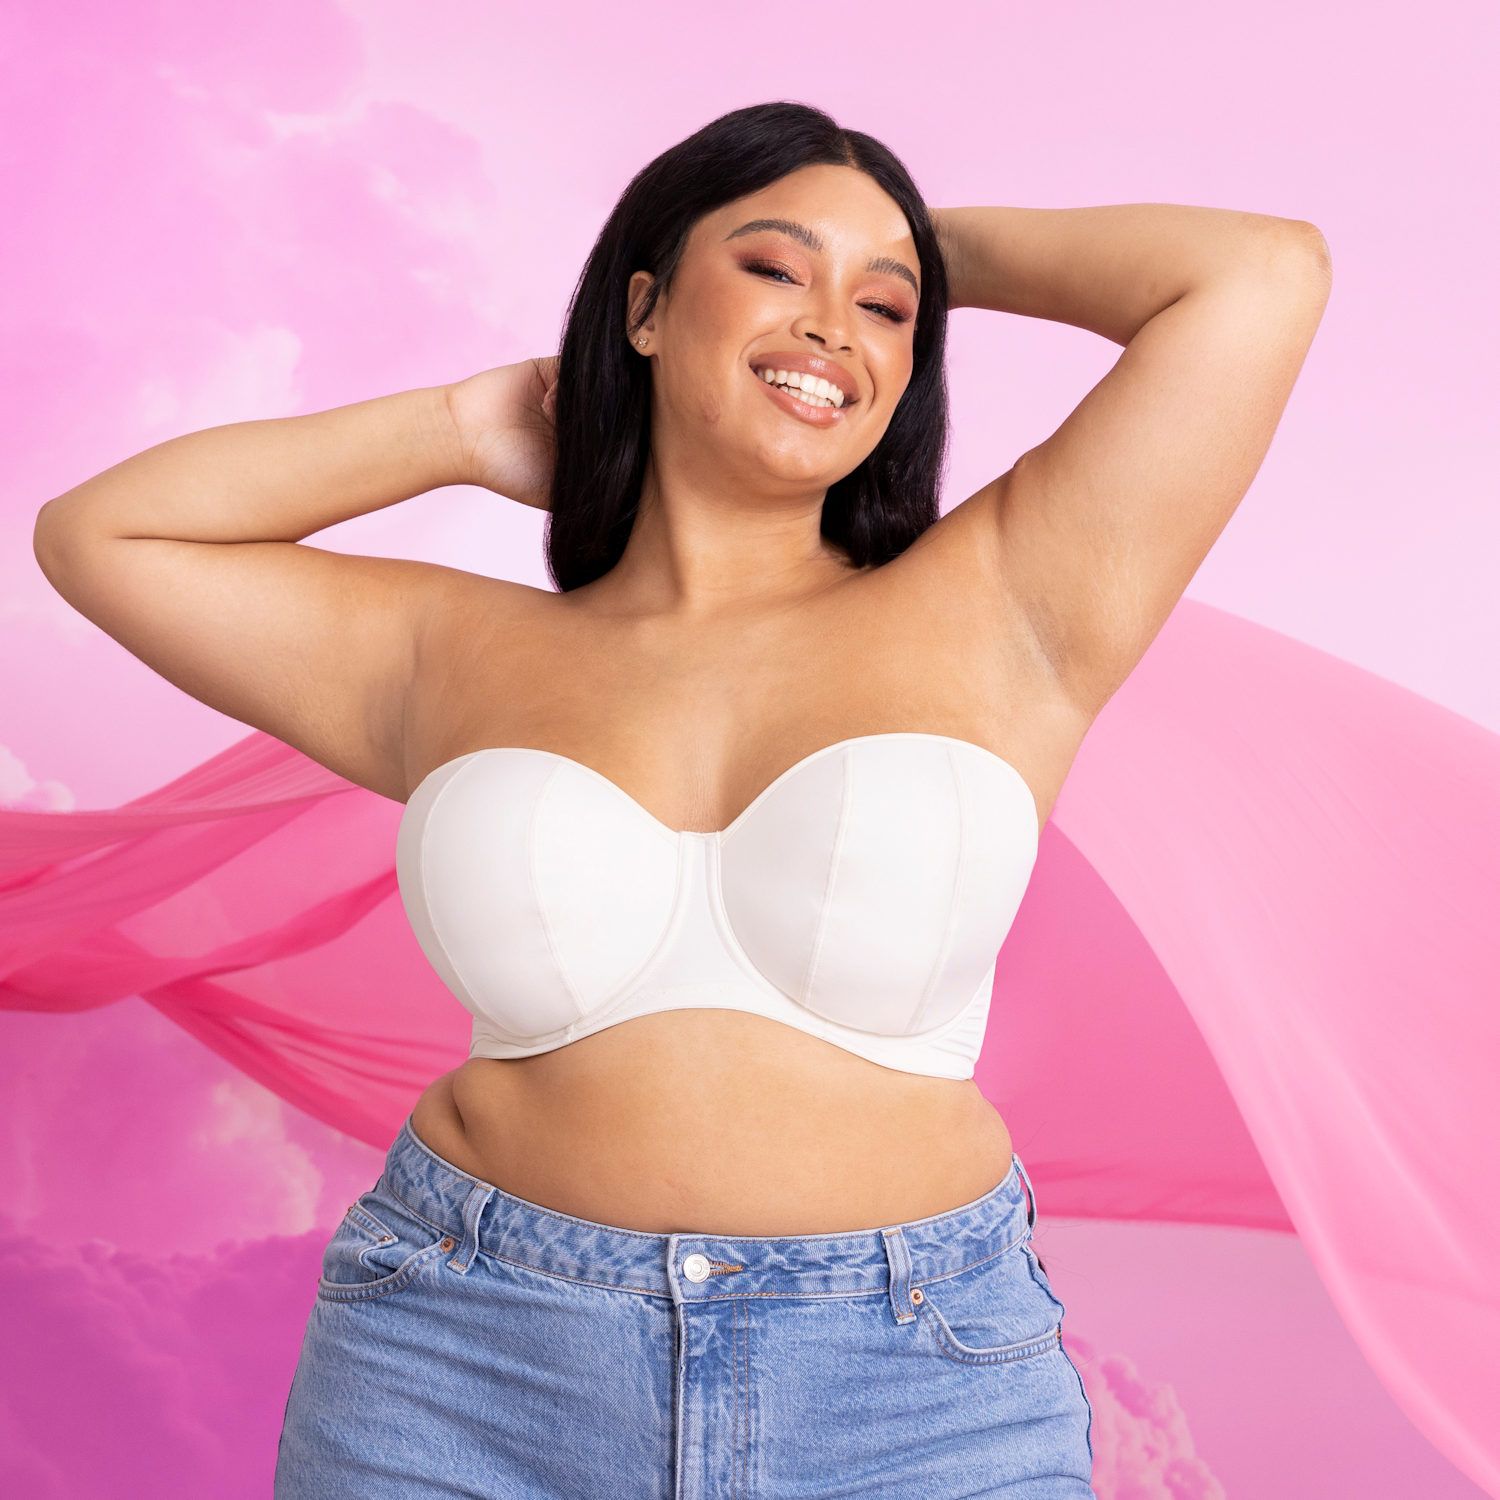 Ivory Rose Lingerie on X: Introducing our £16 Multiway Strapless